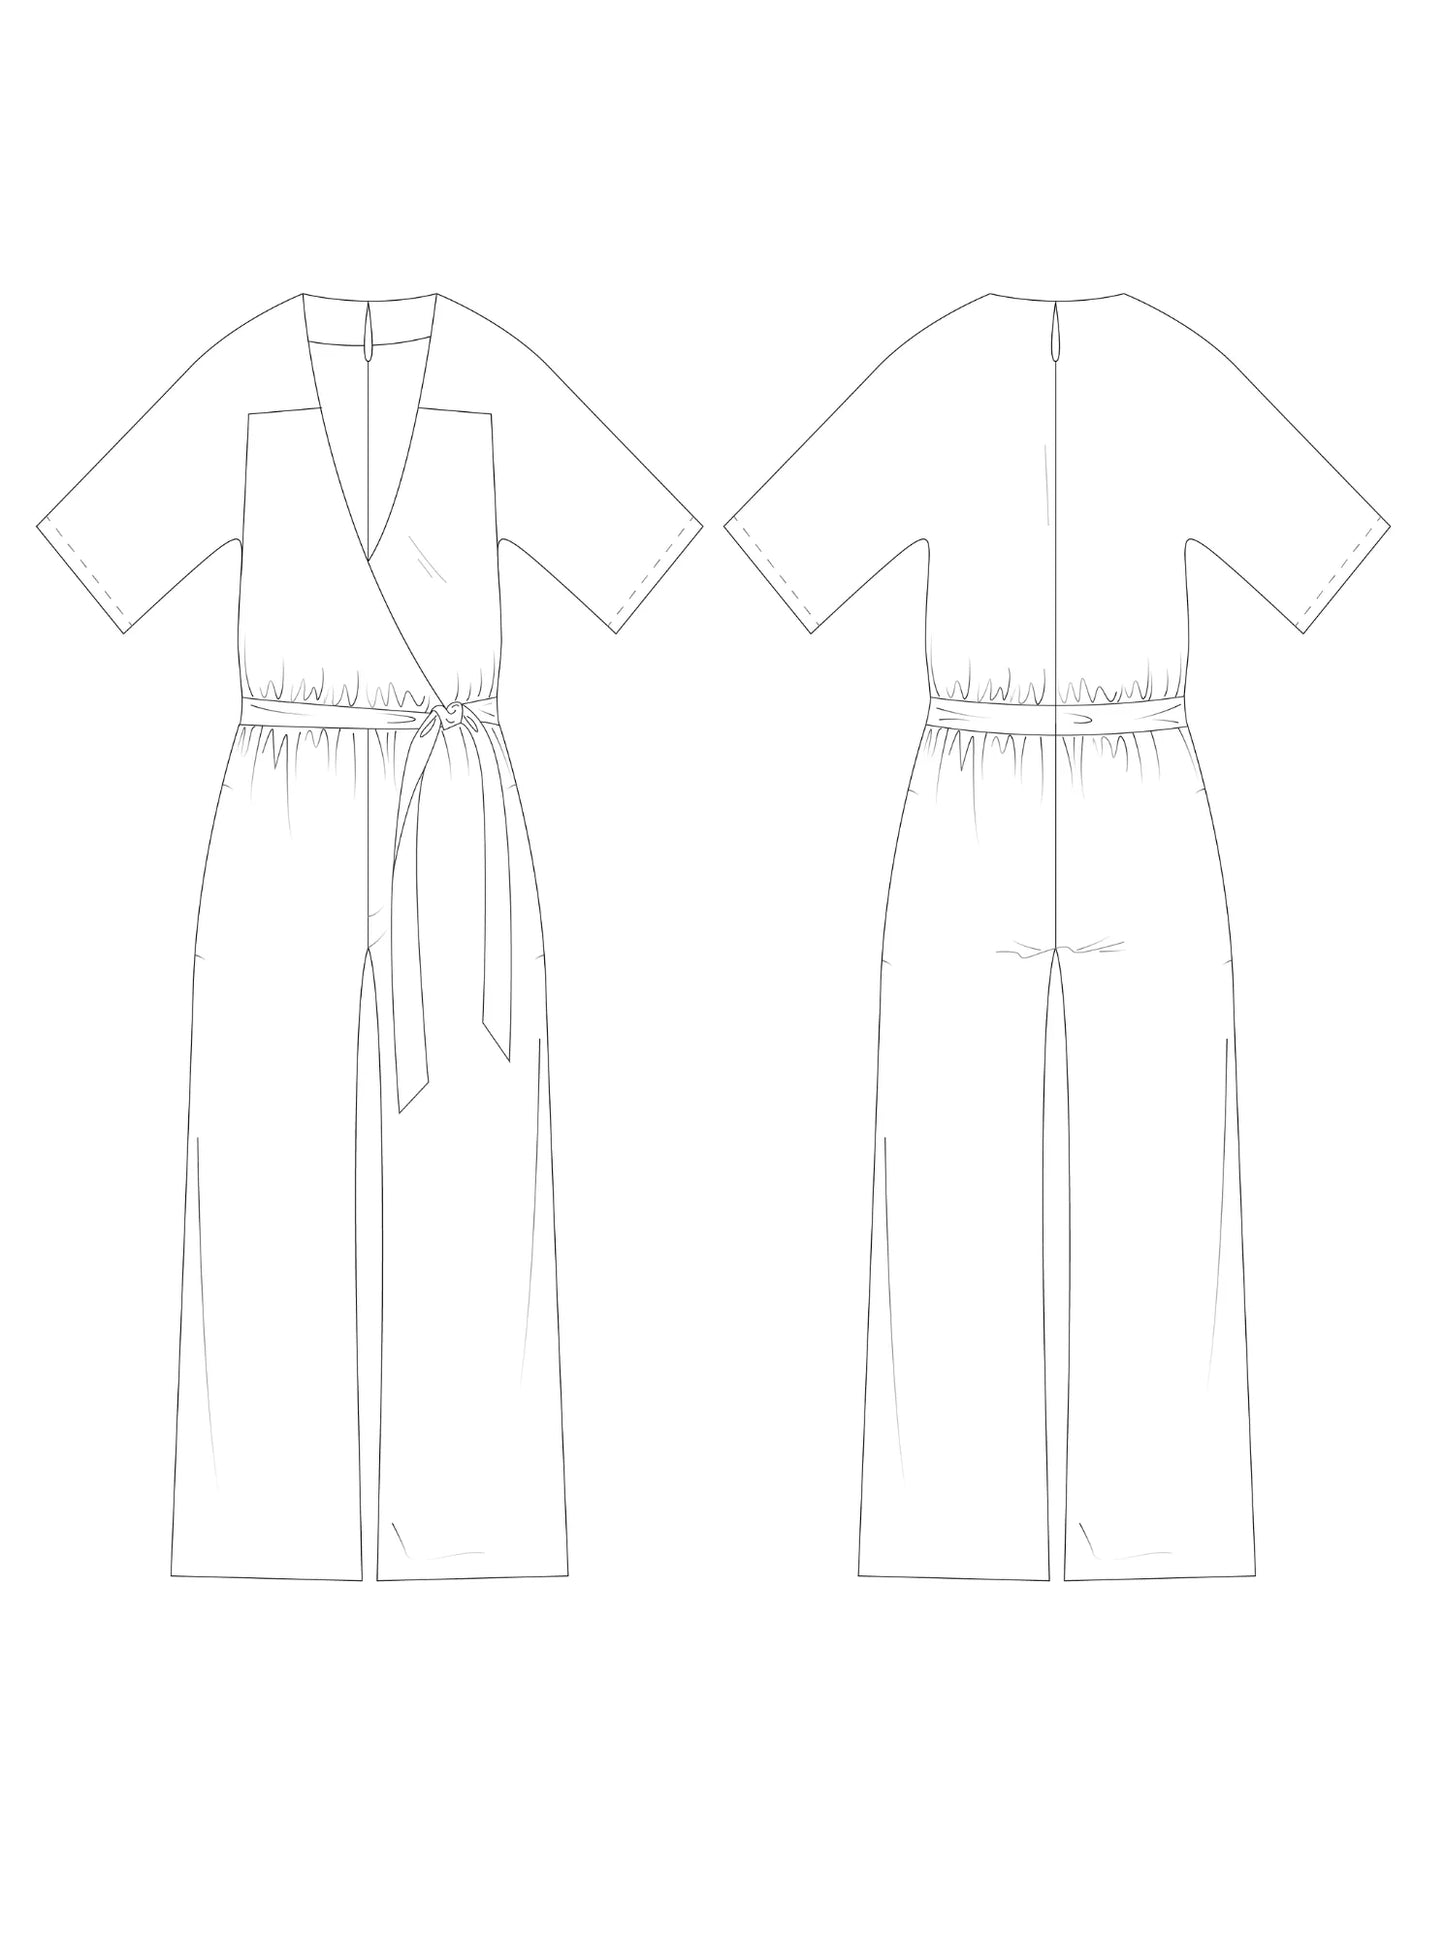 THE JUMPSET - Jumpsuit & Dress Sewing Pattern By The Avid Seamstress